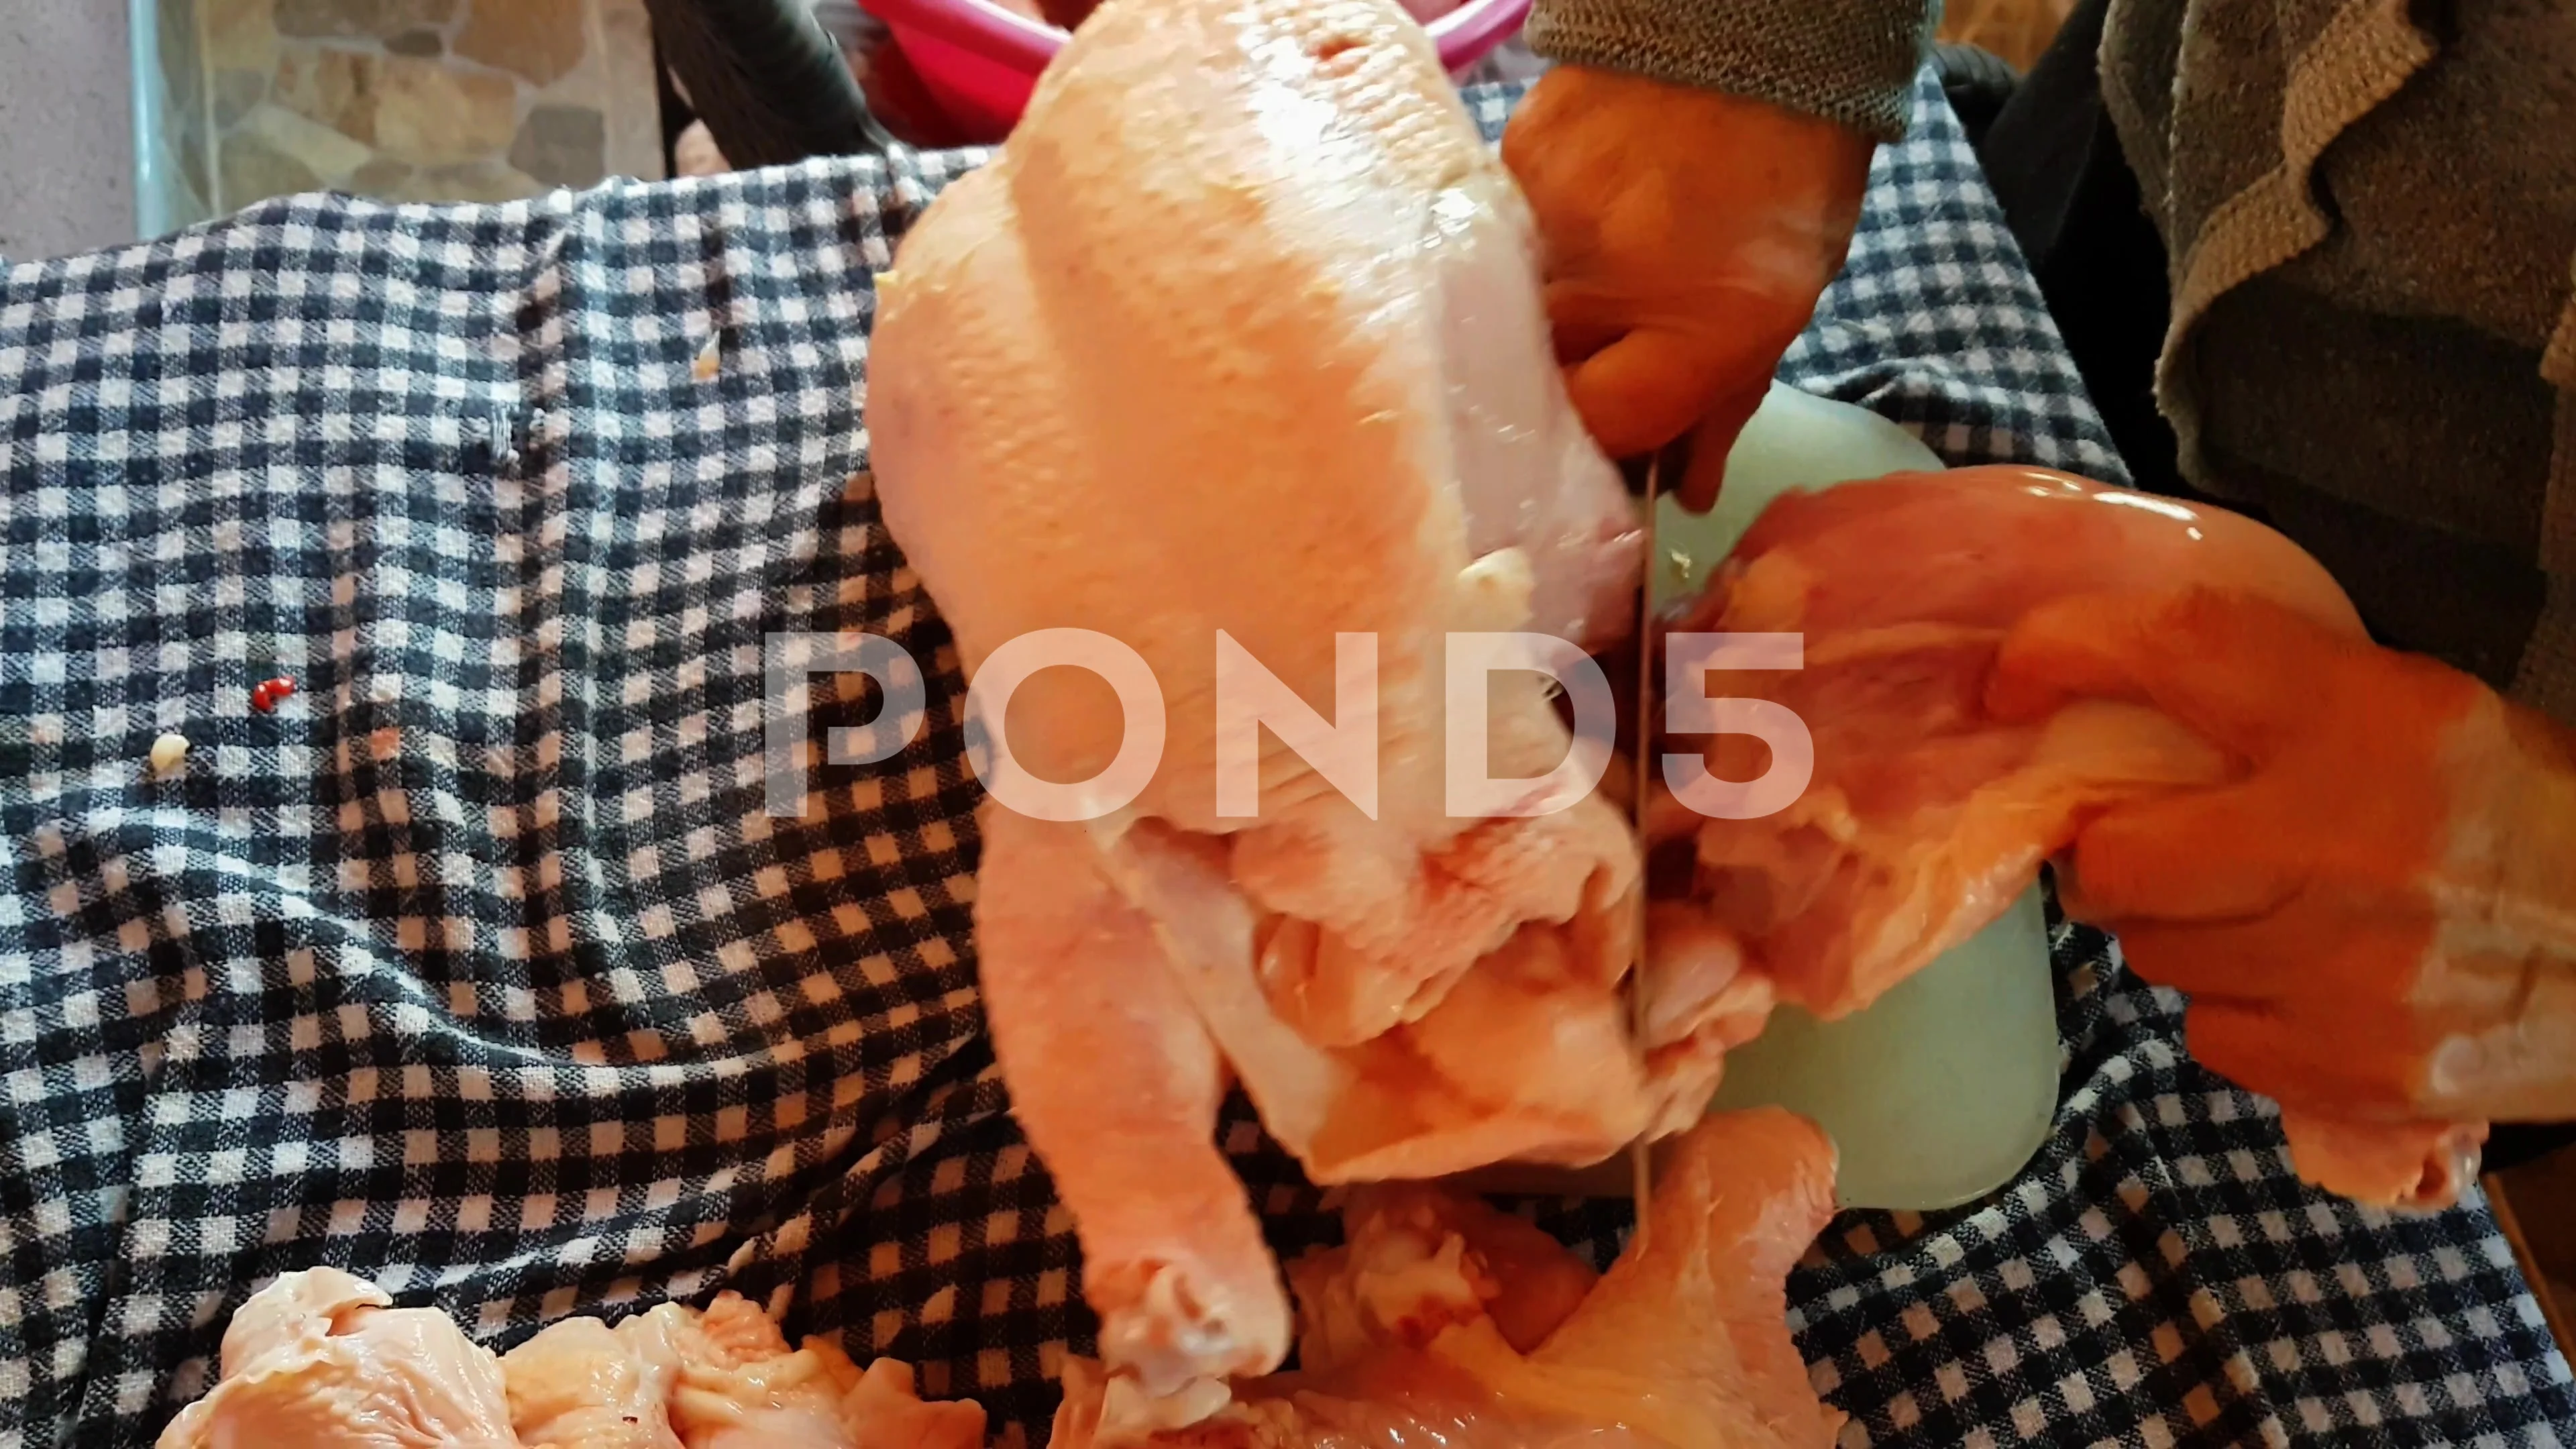 Female Hands Chef Cutting Raw Chicken Meat Breast. Stock Footage